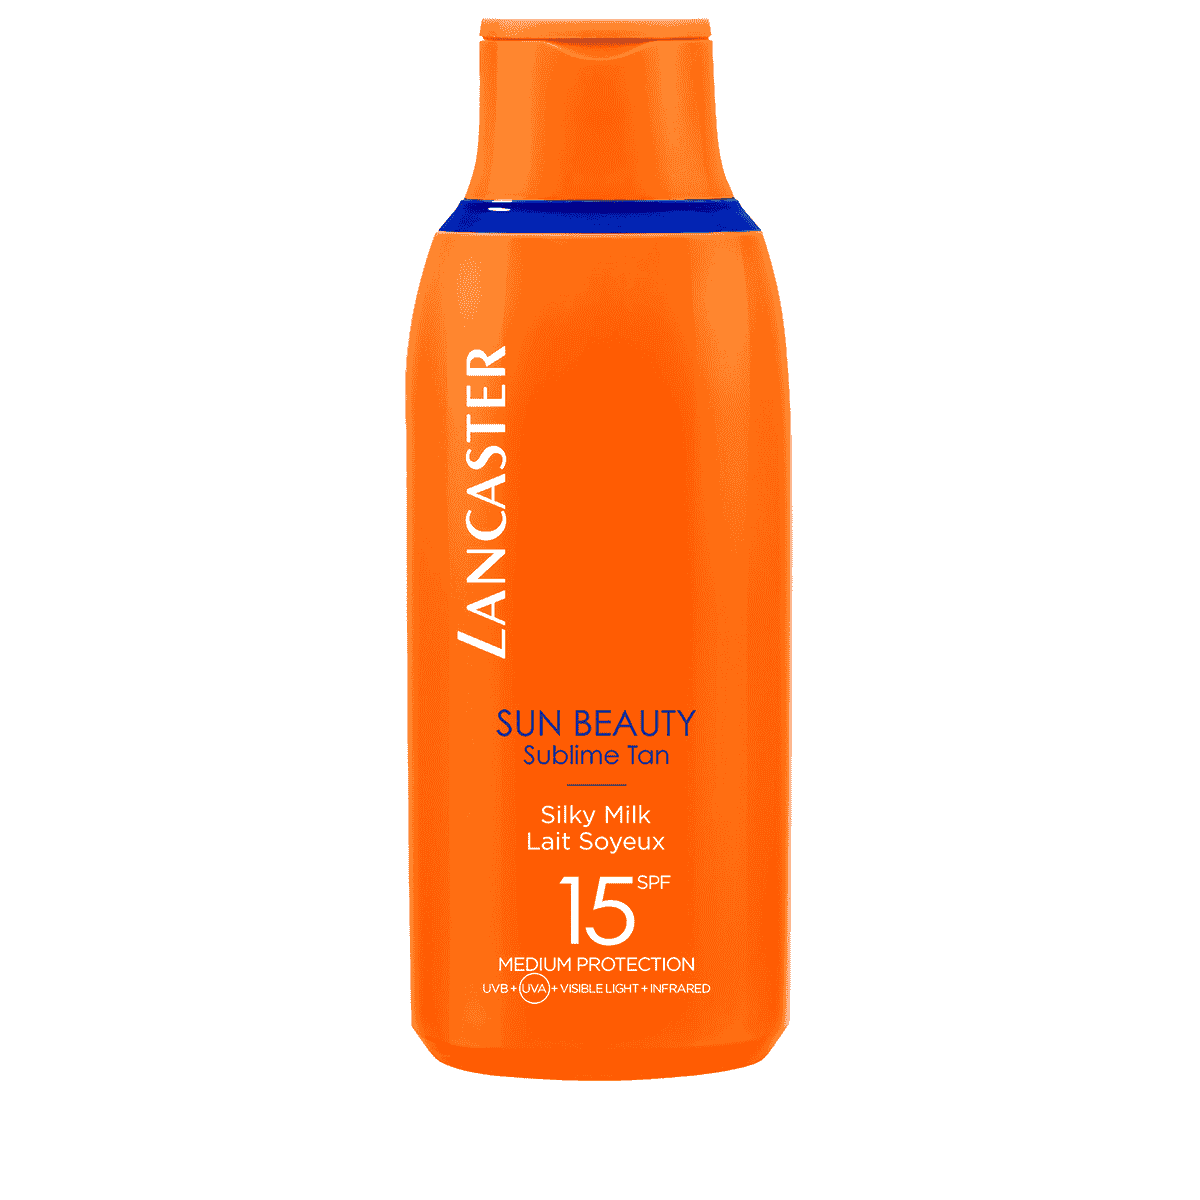 Lancaster Sun Beauty Sumblime Tan Spf 15 / 175 ml - Karout Online -Karout Online Shopping In lebanon - Karout Express Delivery 